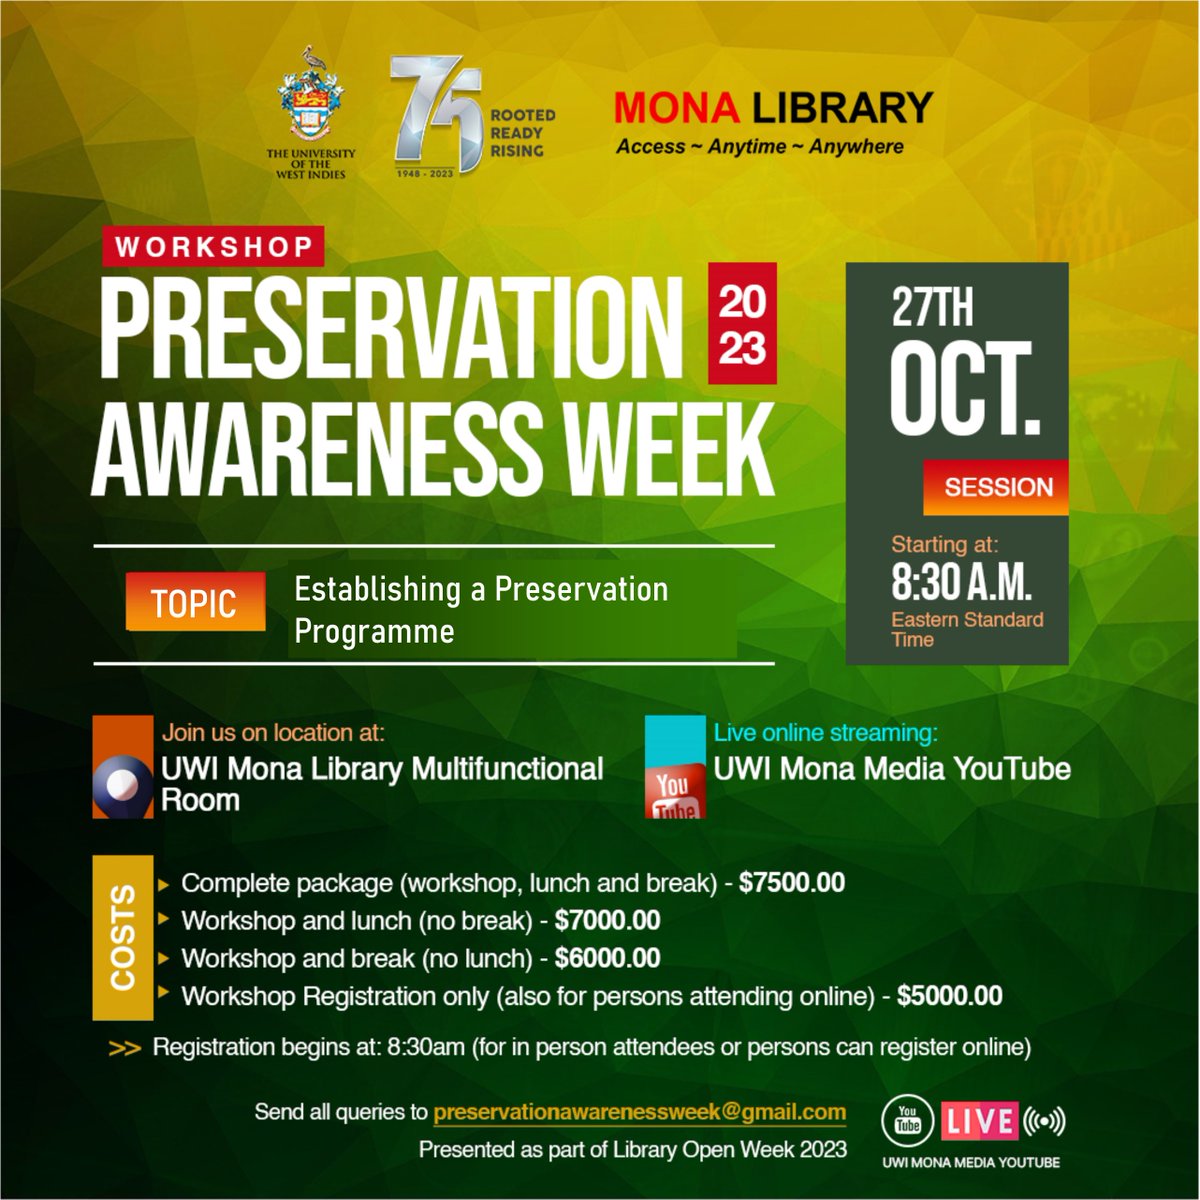 The Main Library of The UWI, invites you all to attend our Preservation Awareness Week Workshop on October 27th. Please see the flyer below for further details. To register for the Workshop: forms.gle/cGzsh9mWSunPBA…